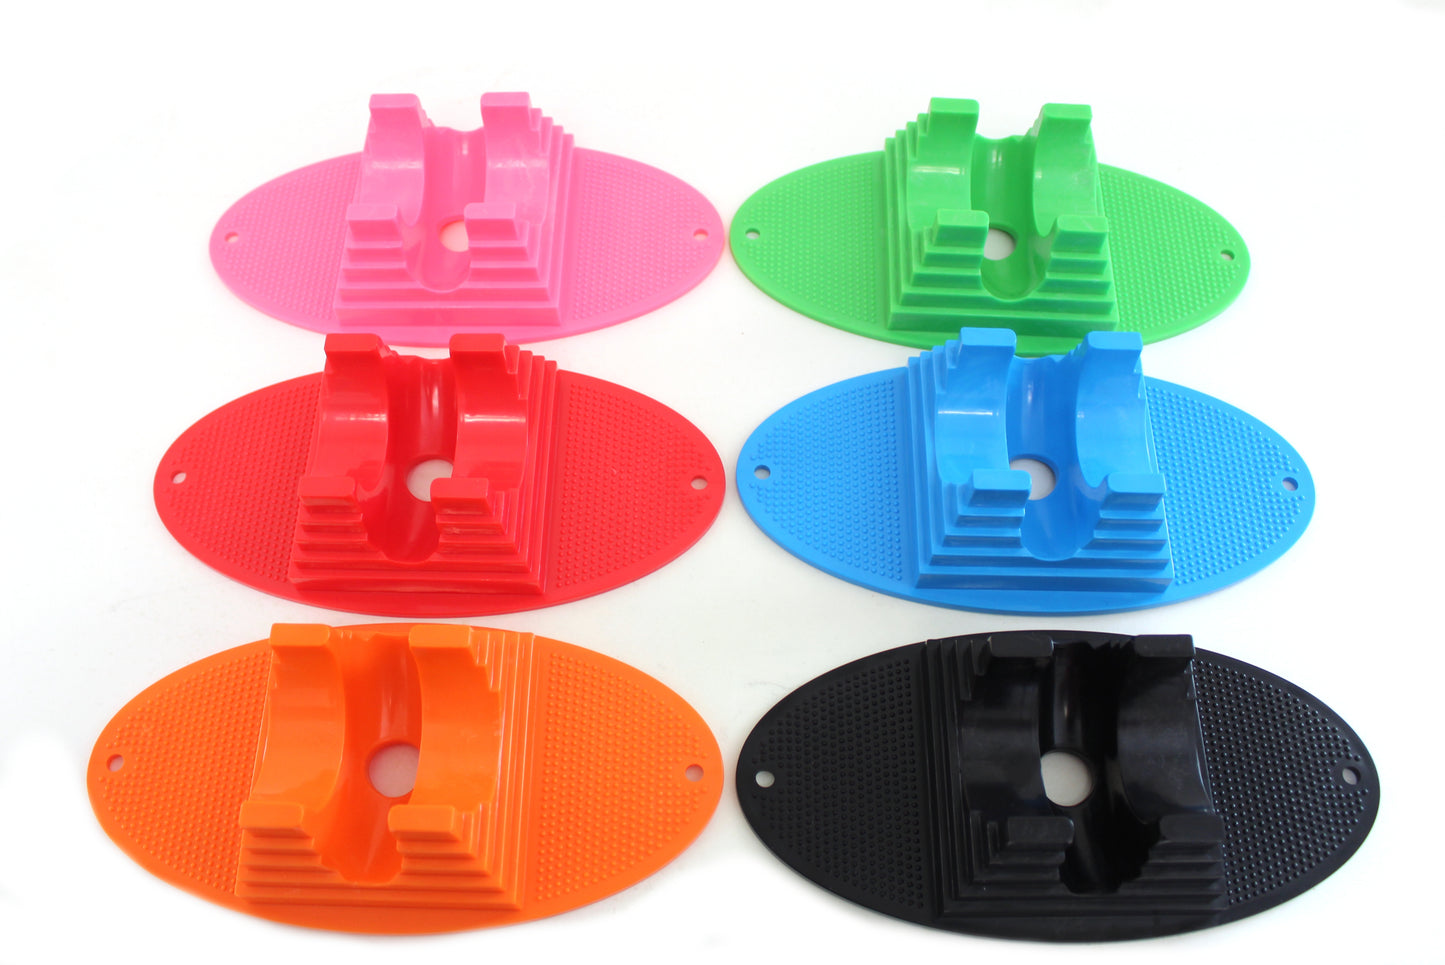 Scooter Stand for 95mm to 120 mm Scooter Wheels fits most Major Scooter Brands